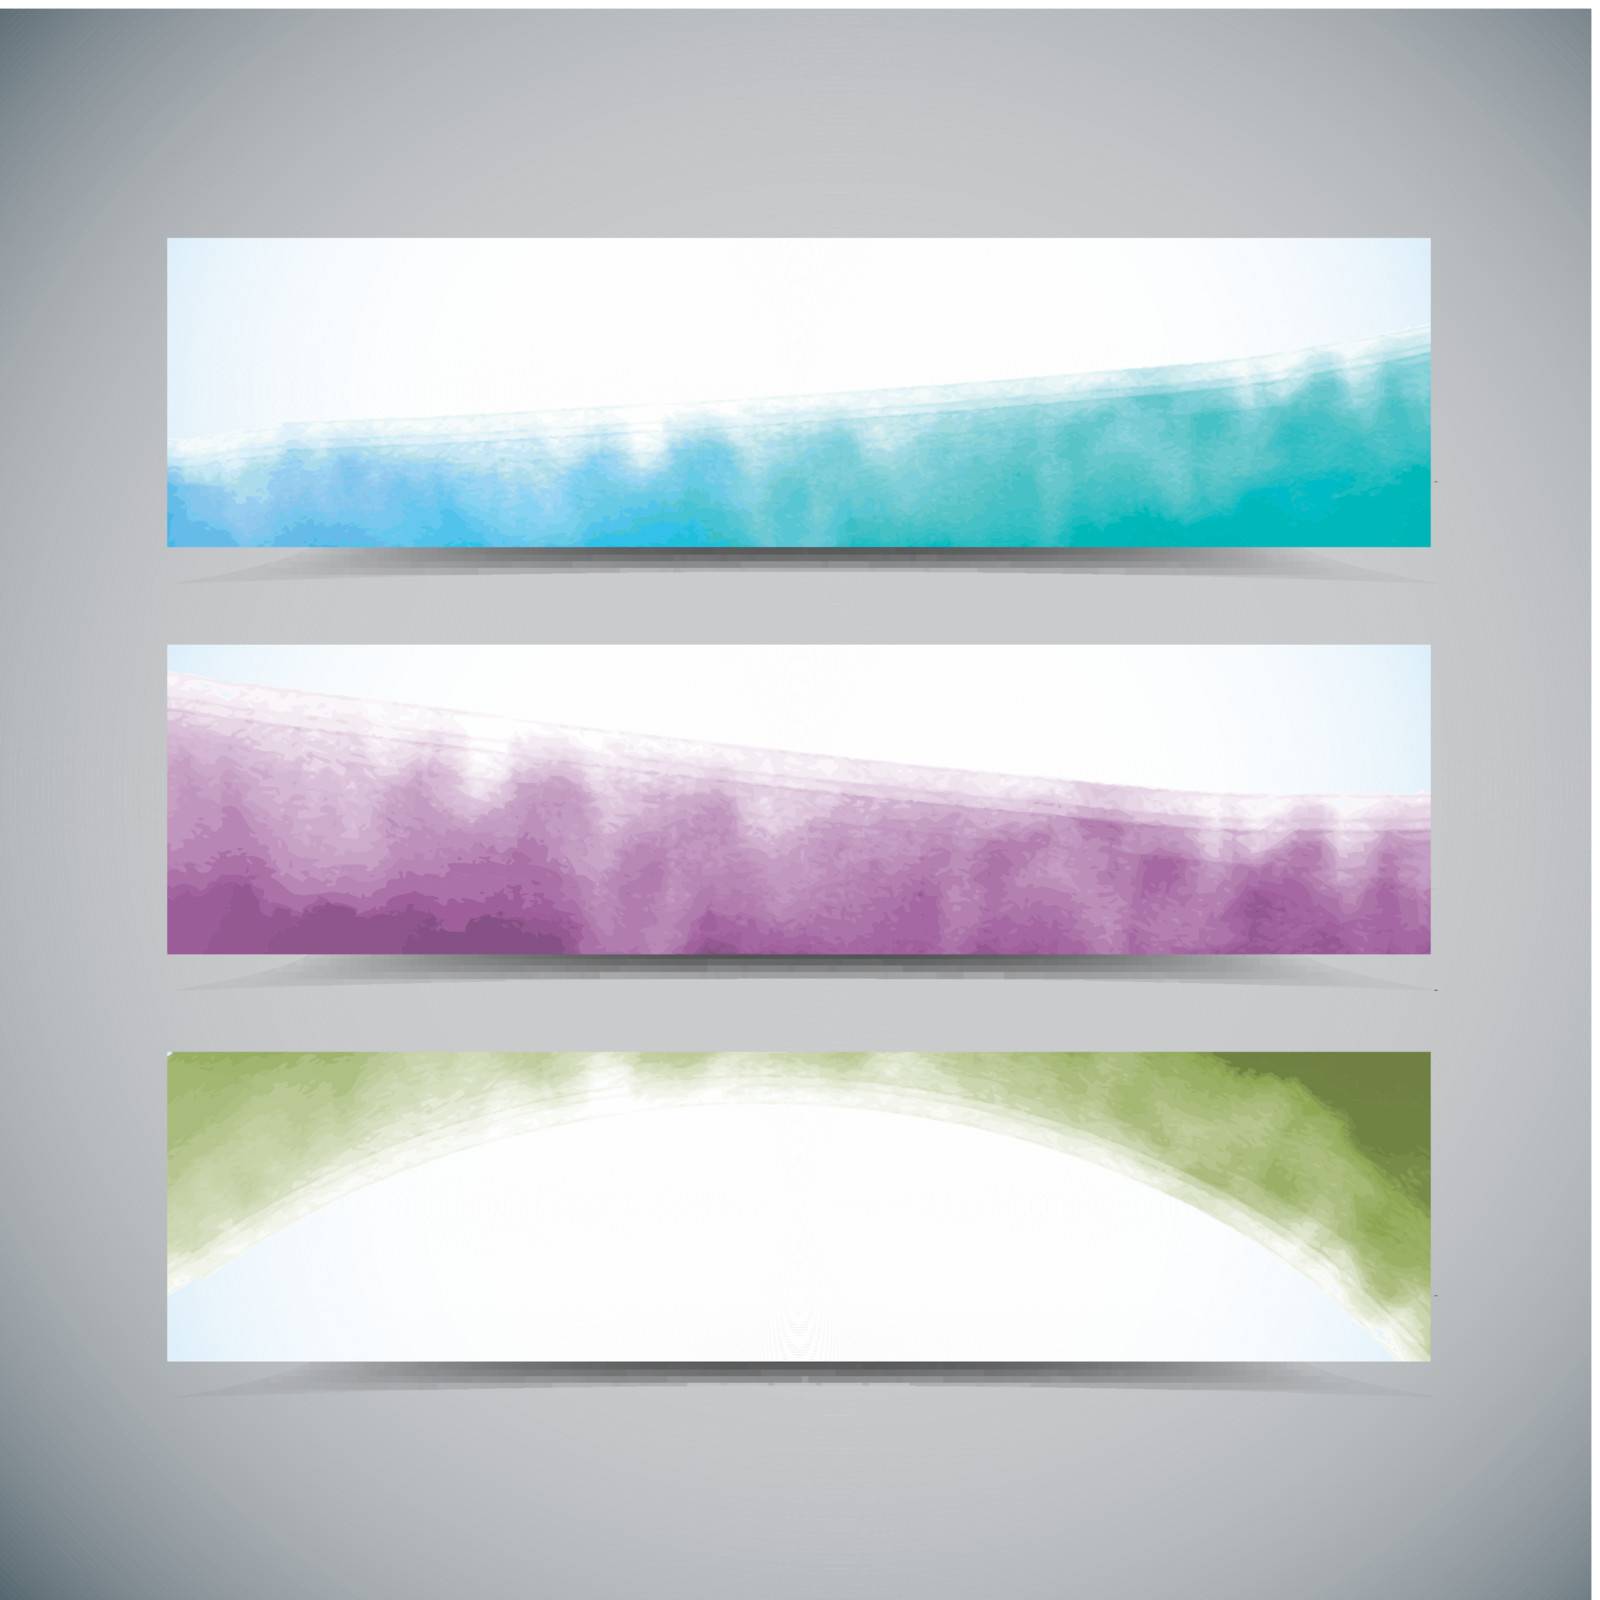 Watercolor banners  by milinz